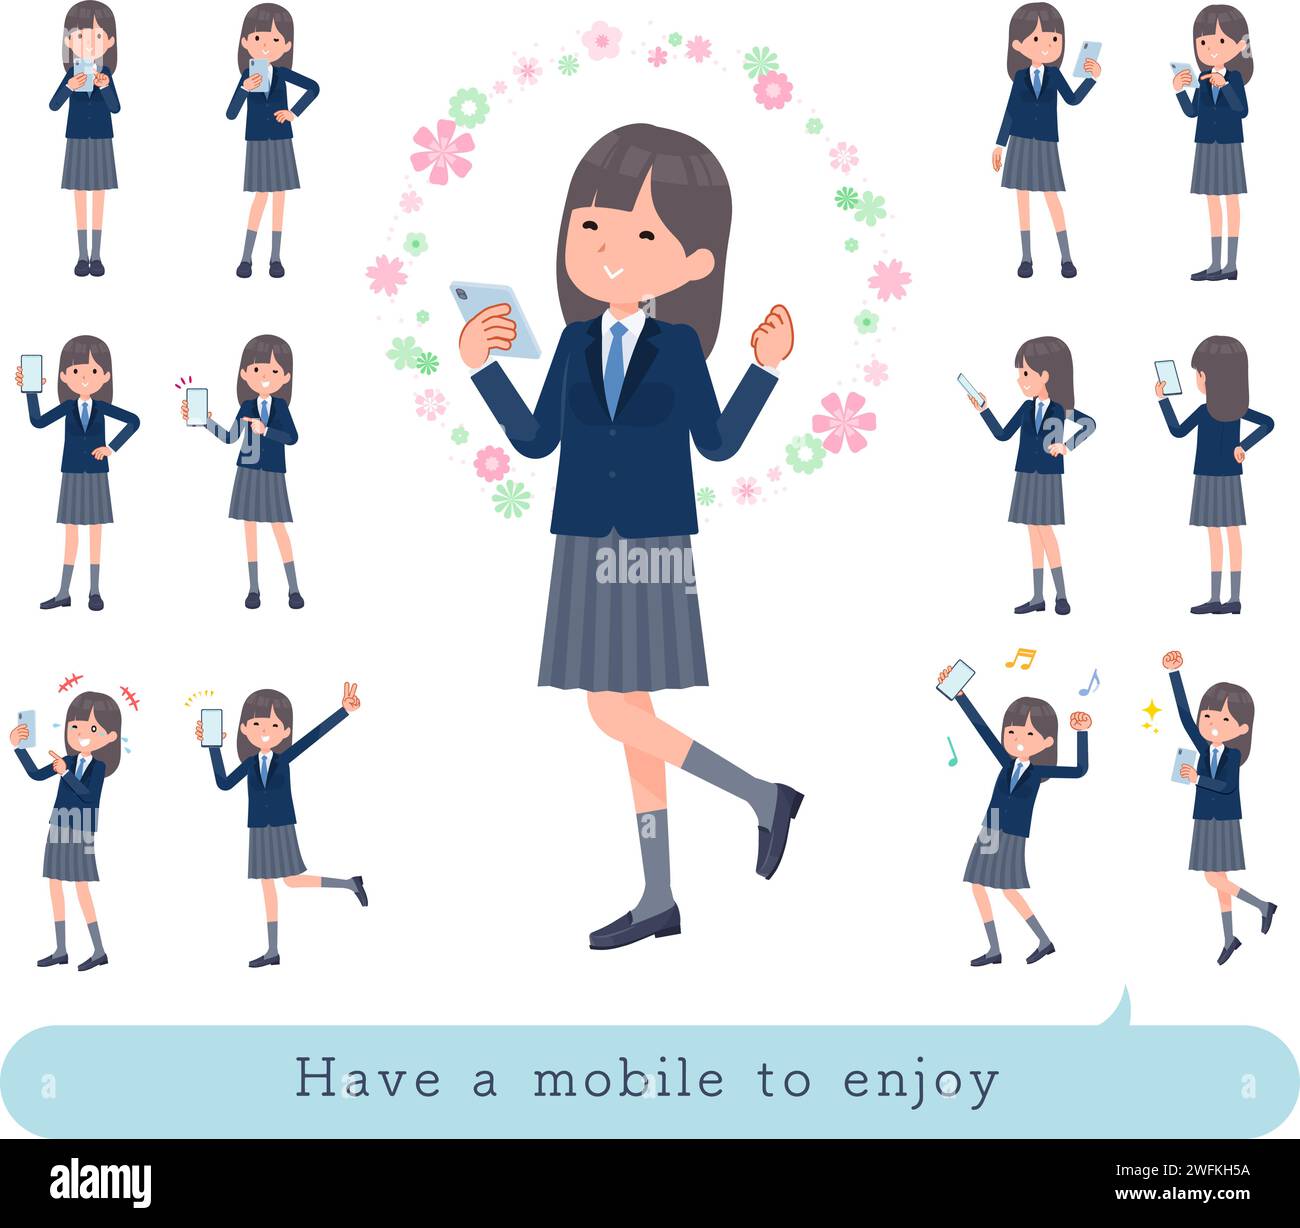 A set of navy blazer student women to enjoy using a smartphone.It's vector art so easy to edit. Stock Vector